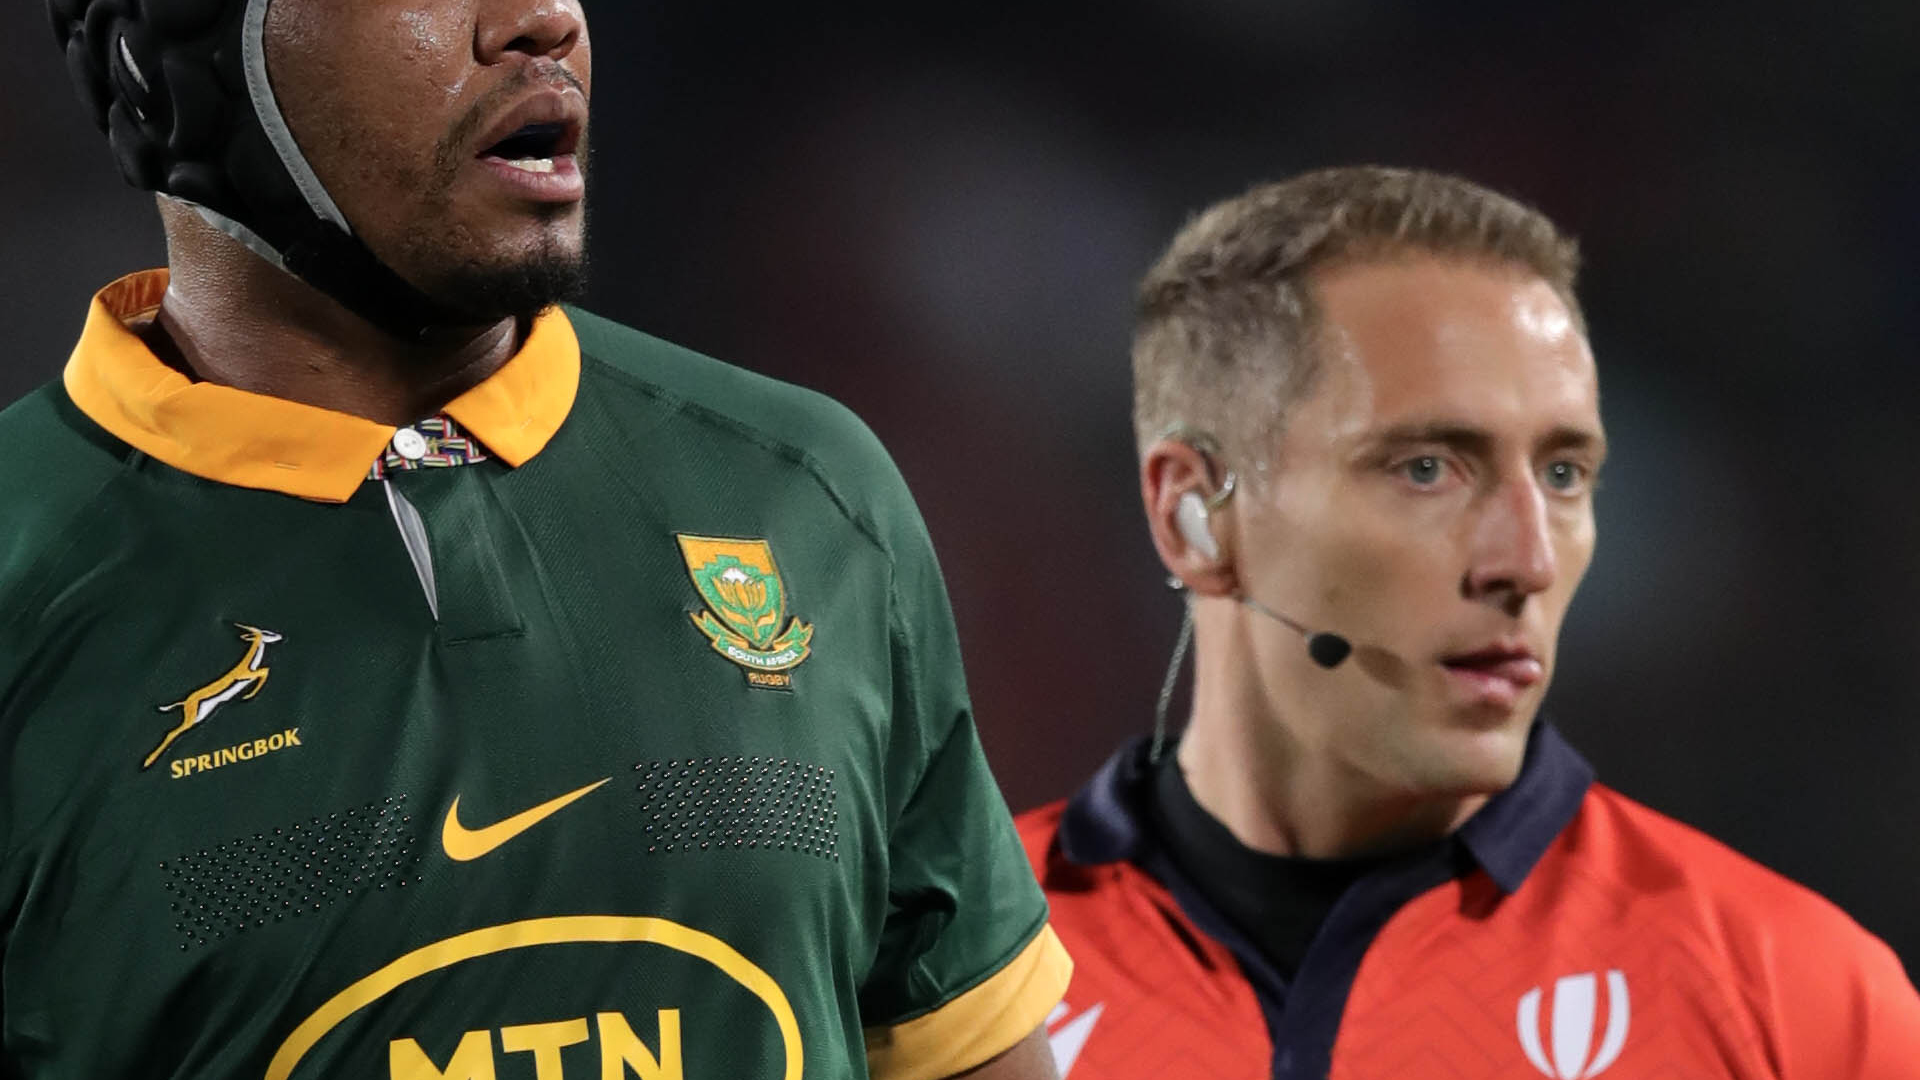 Springboks v Wales Who will be the referee in Cardiff?